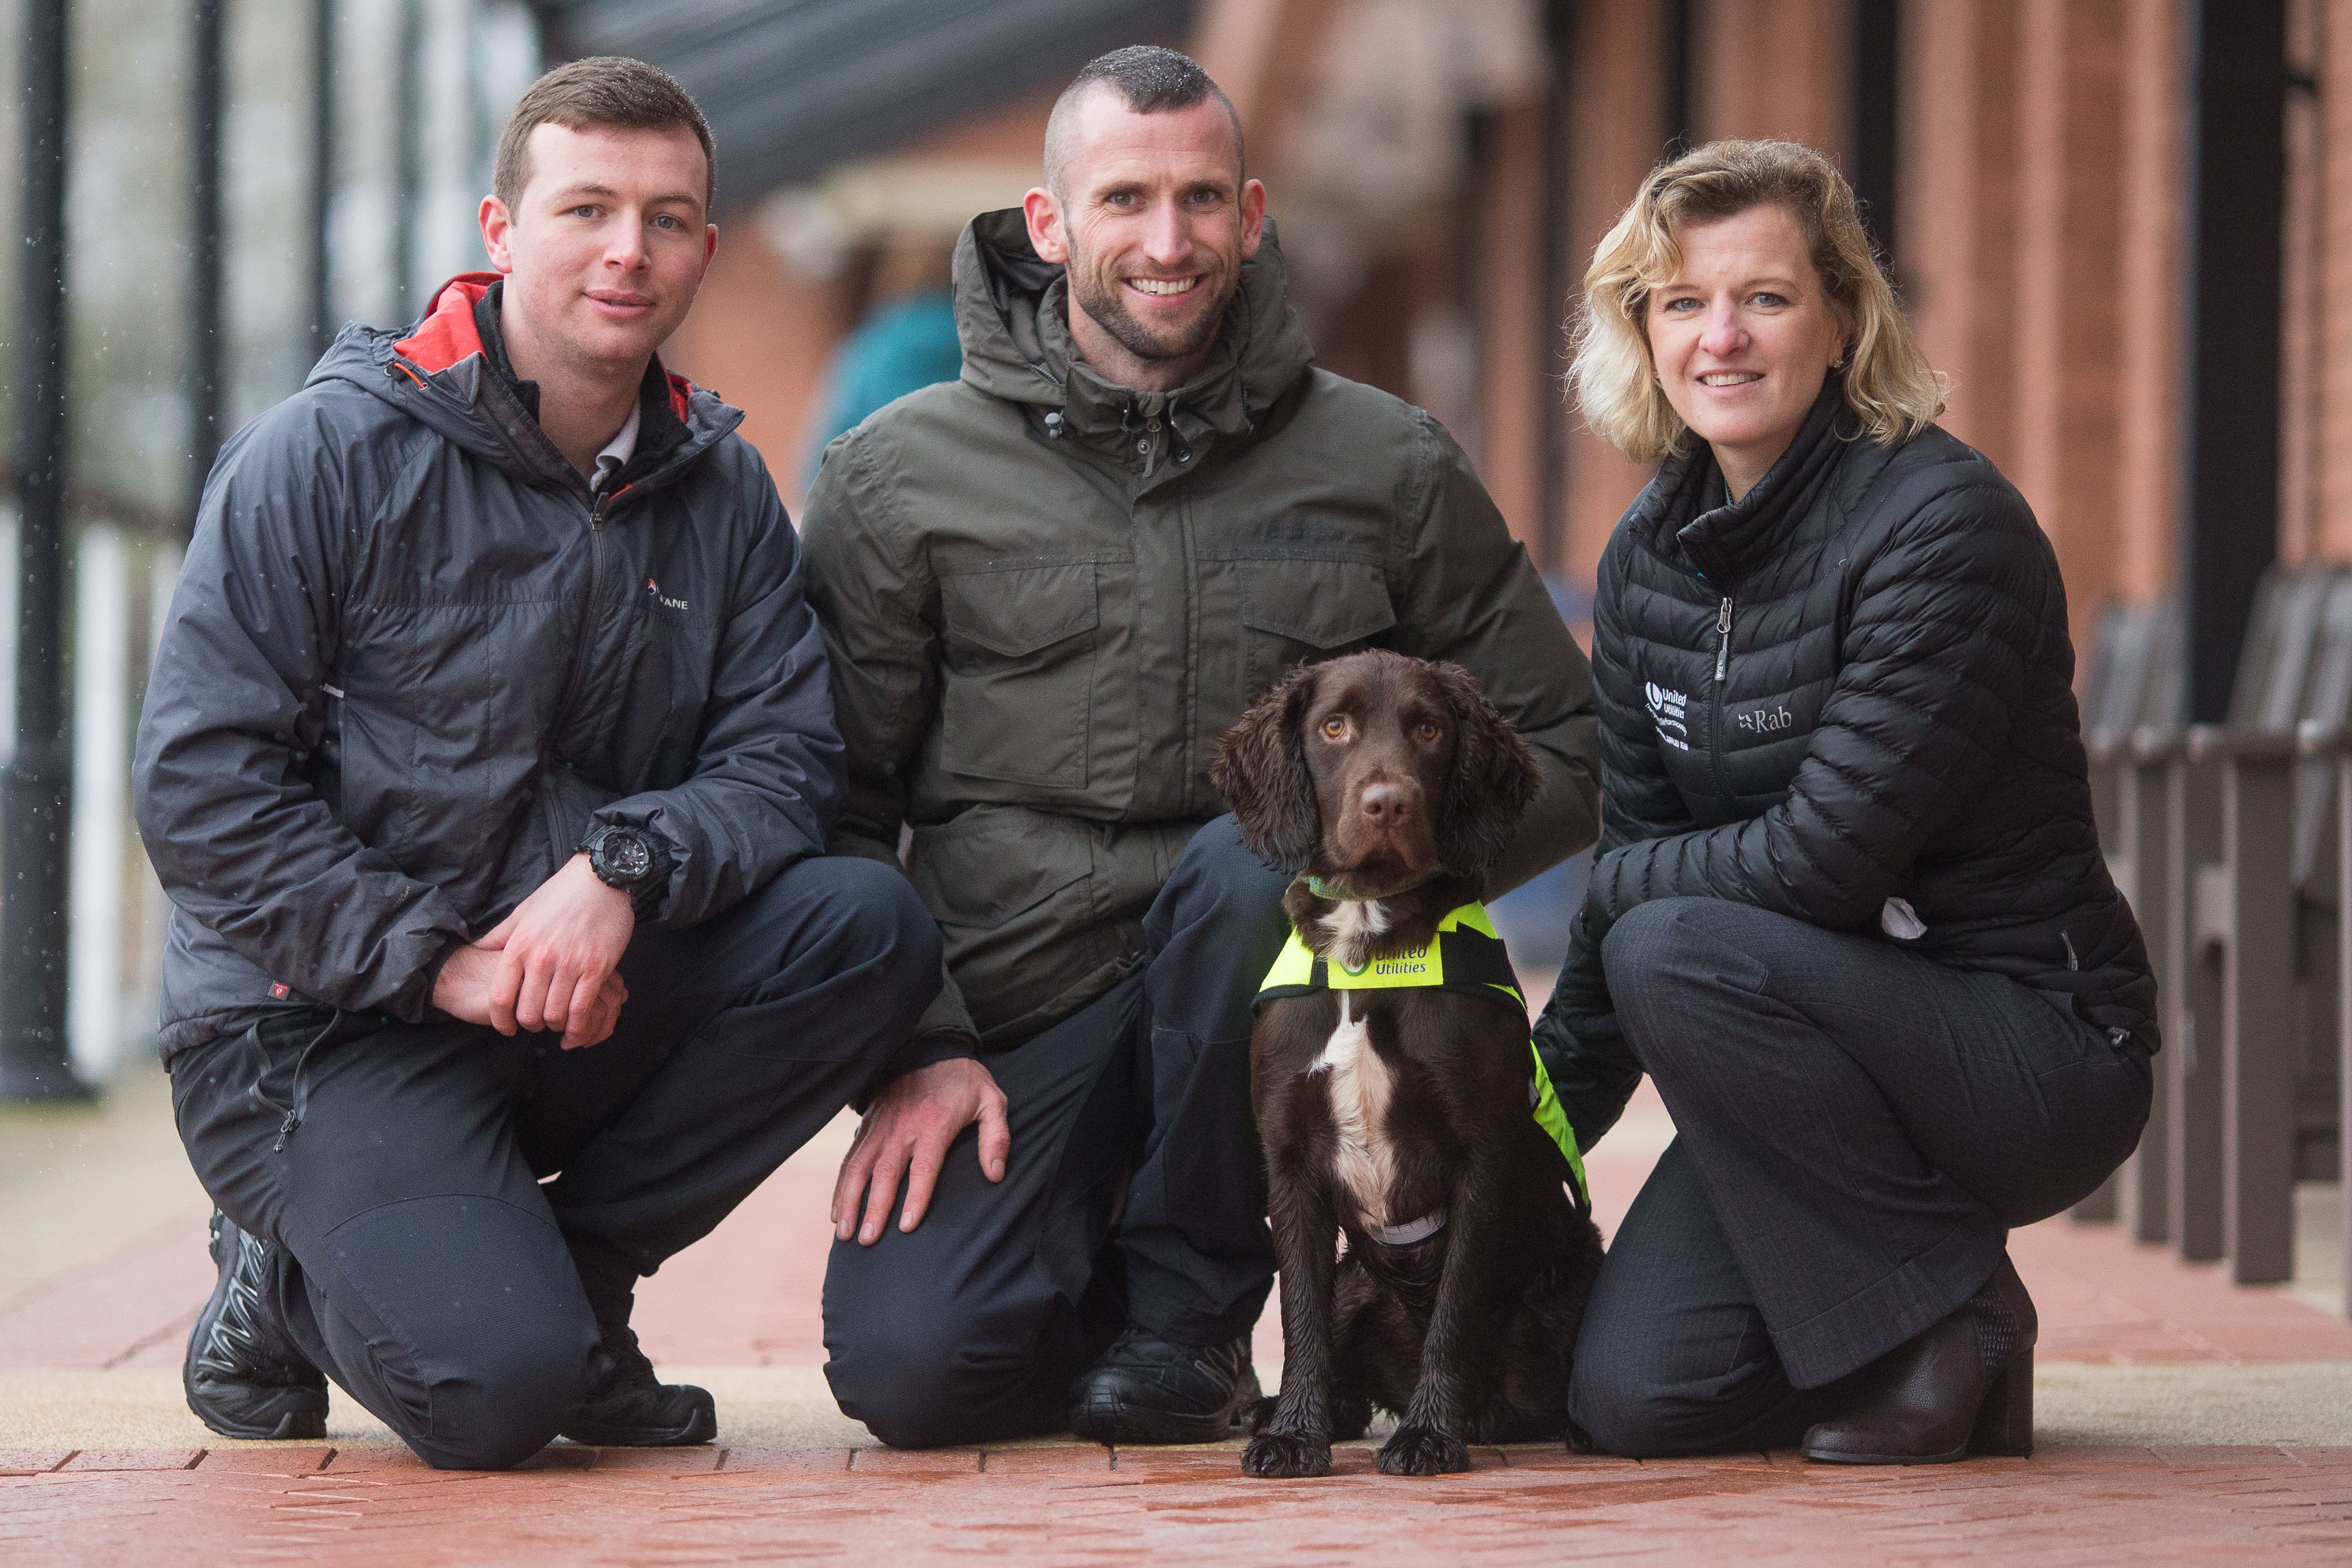 Snipe the dog, with, from left, Luke Jones, Ross Stephenson and Hannah Wardle (Aaron Chown/PA)